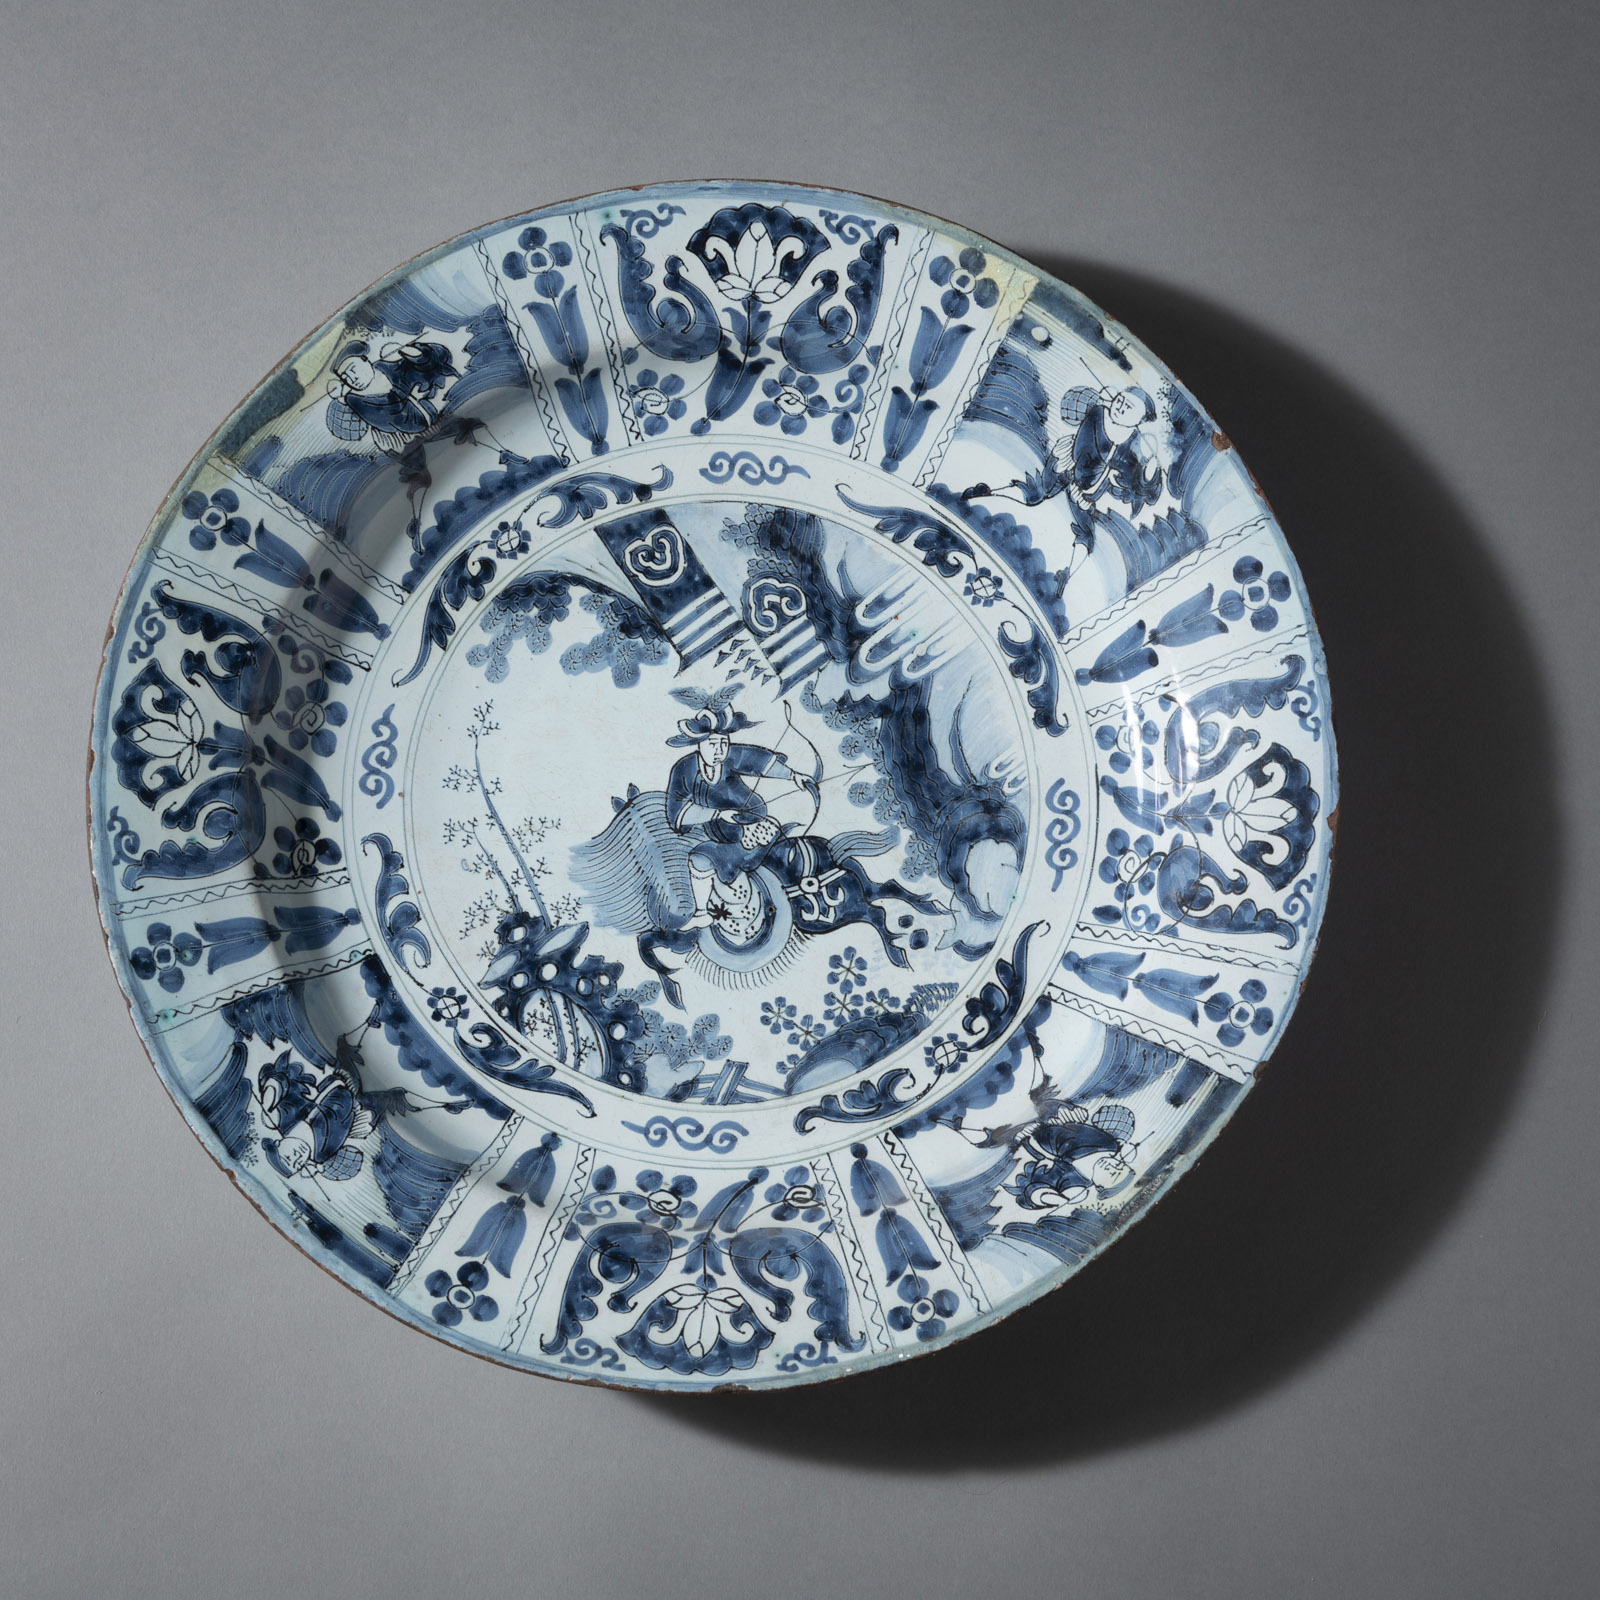 A LARGE CHINOISERIE PATTERN FAIENCE ROUND DISH